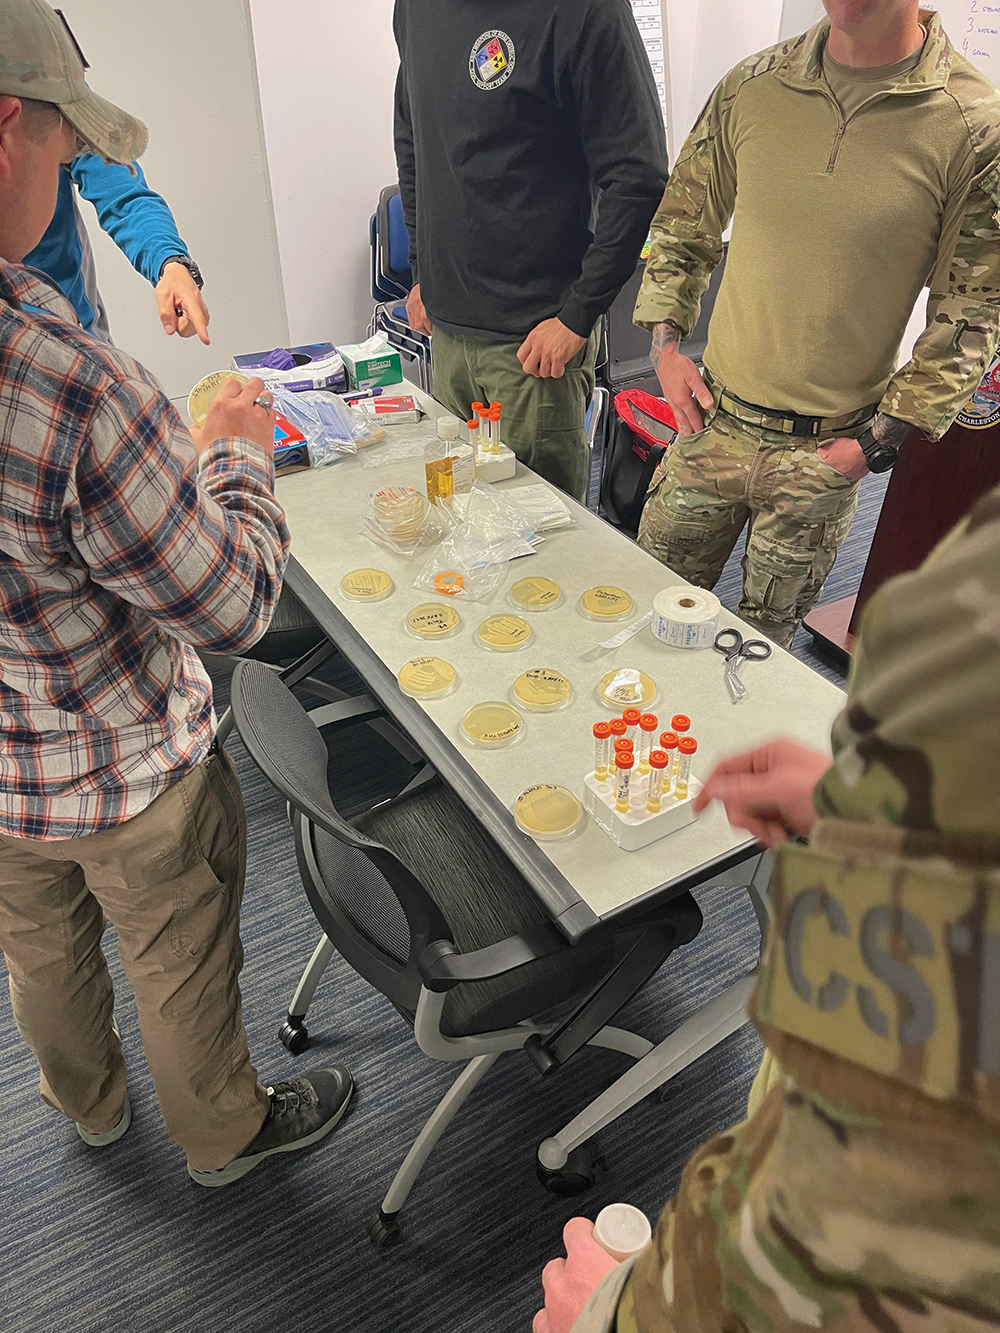 People in military uniforms standing around table of petri dishes